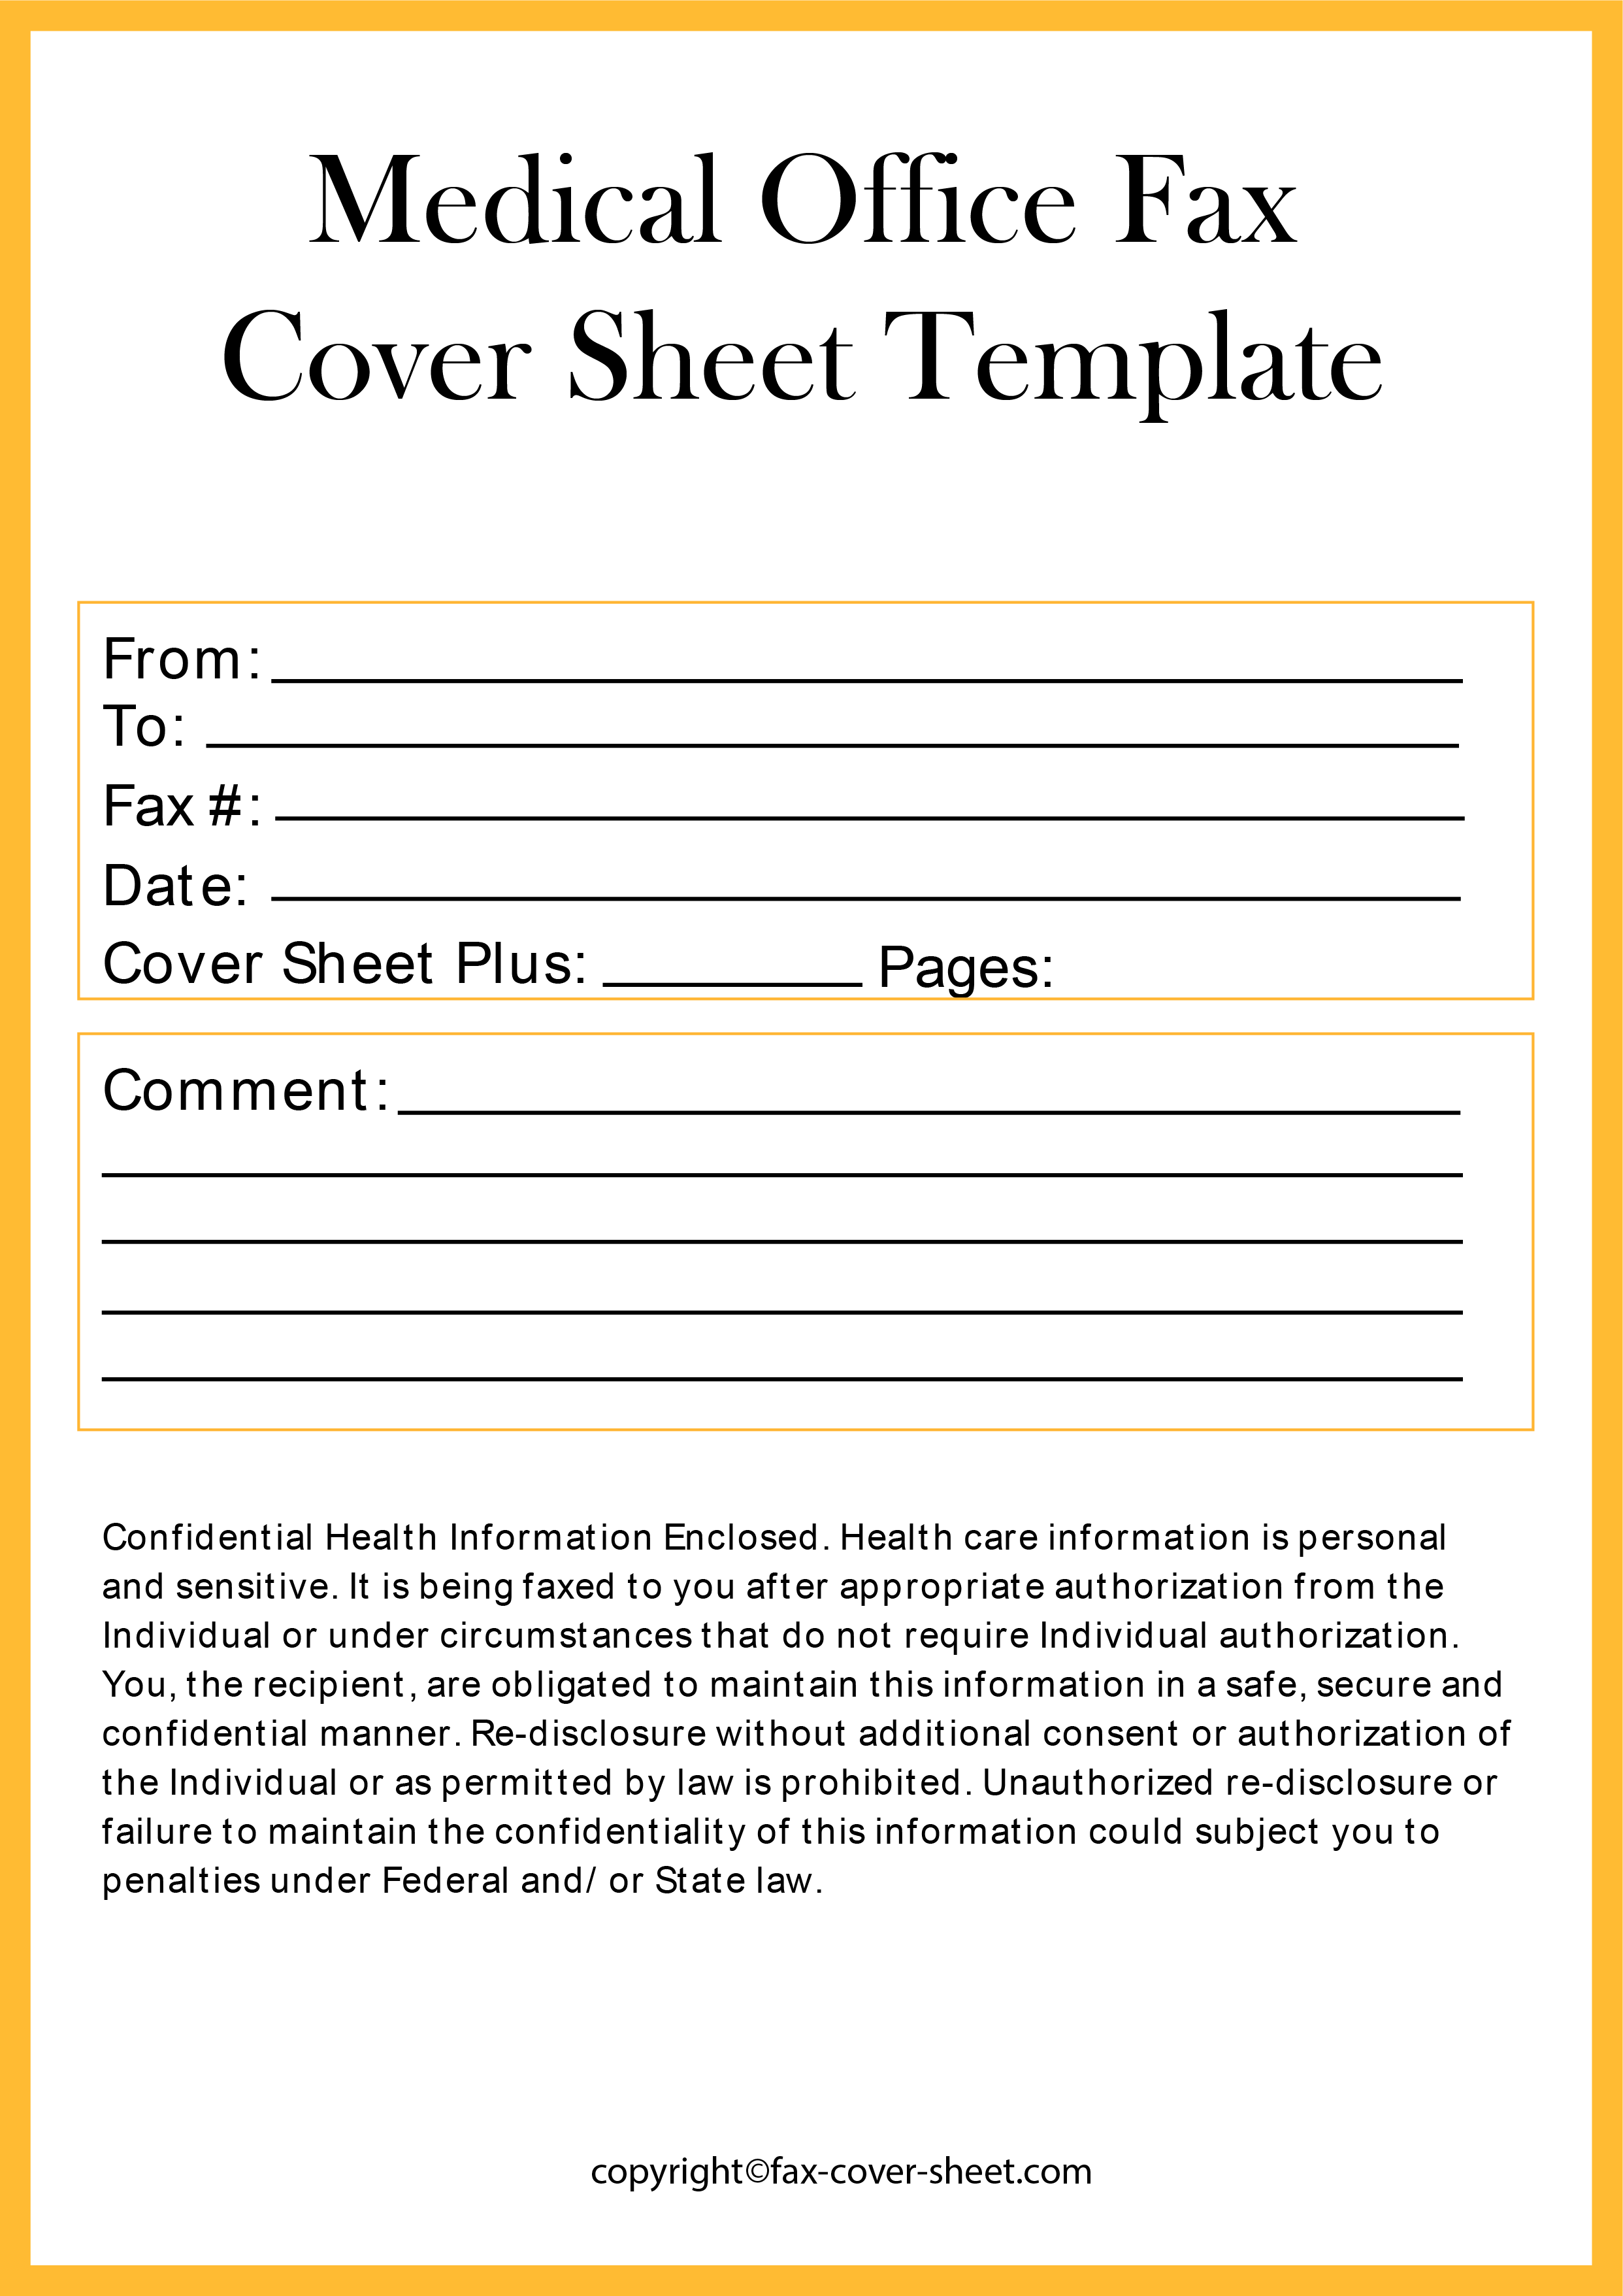 Sample Fax Cover Sheet for Medical Office